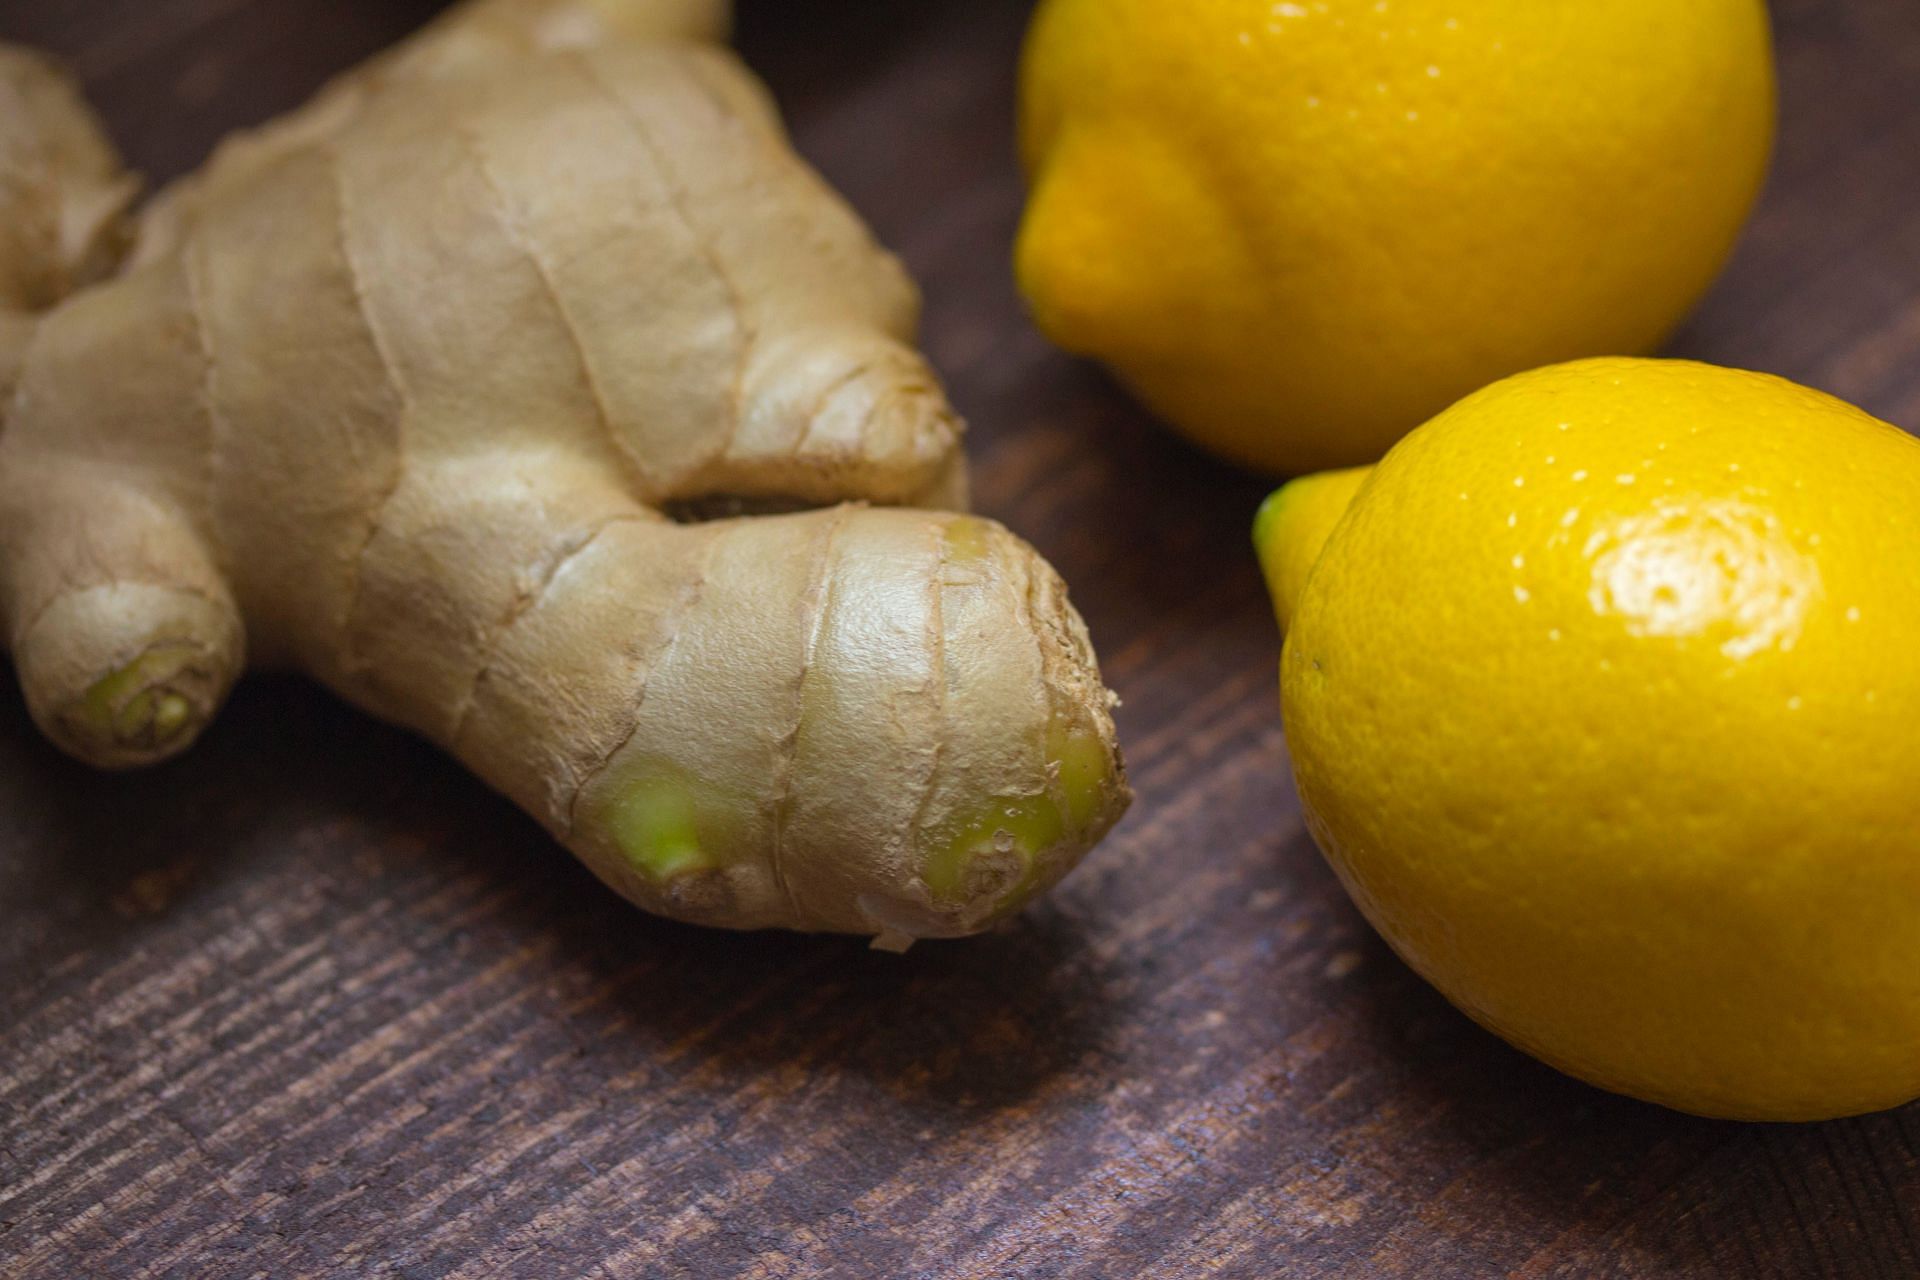 Ginger as an anti-wrinkle food (image sourced via Pexels / Photo by Angele)